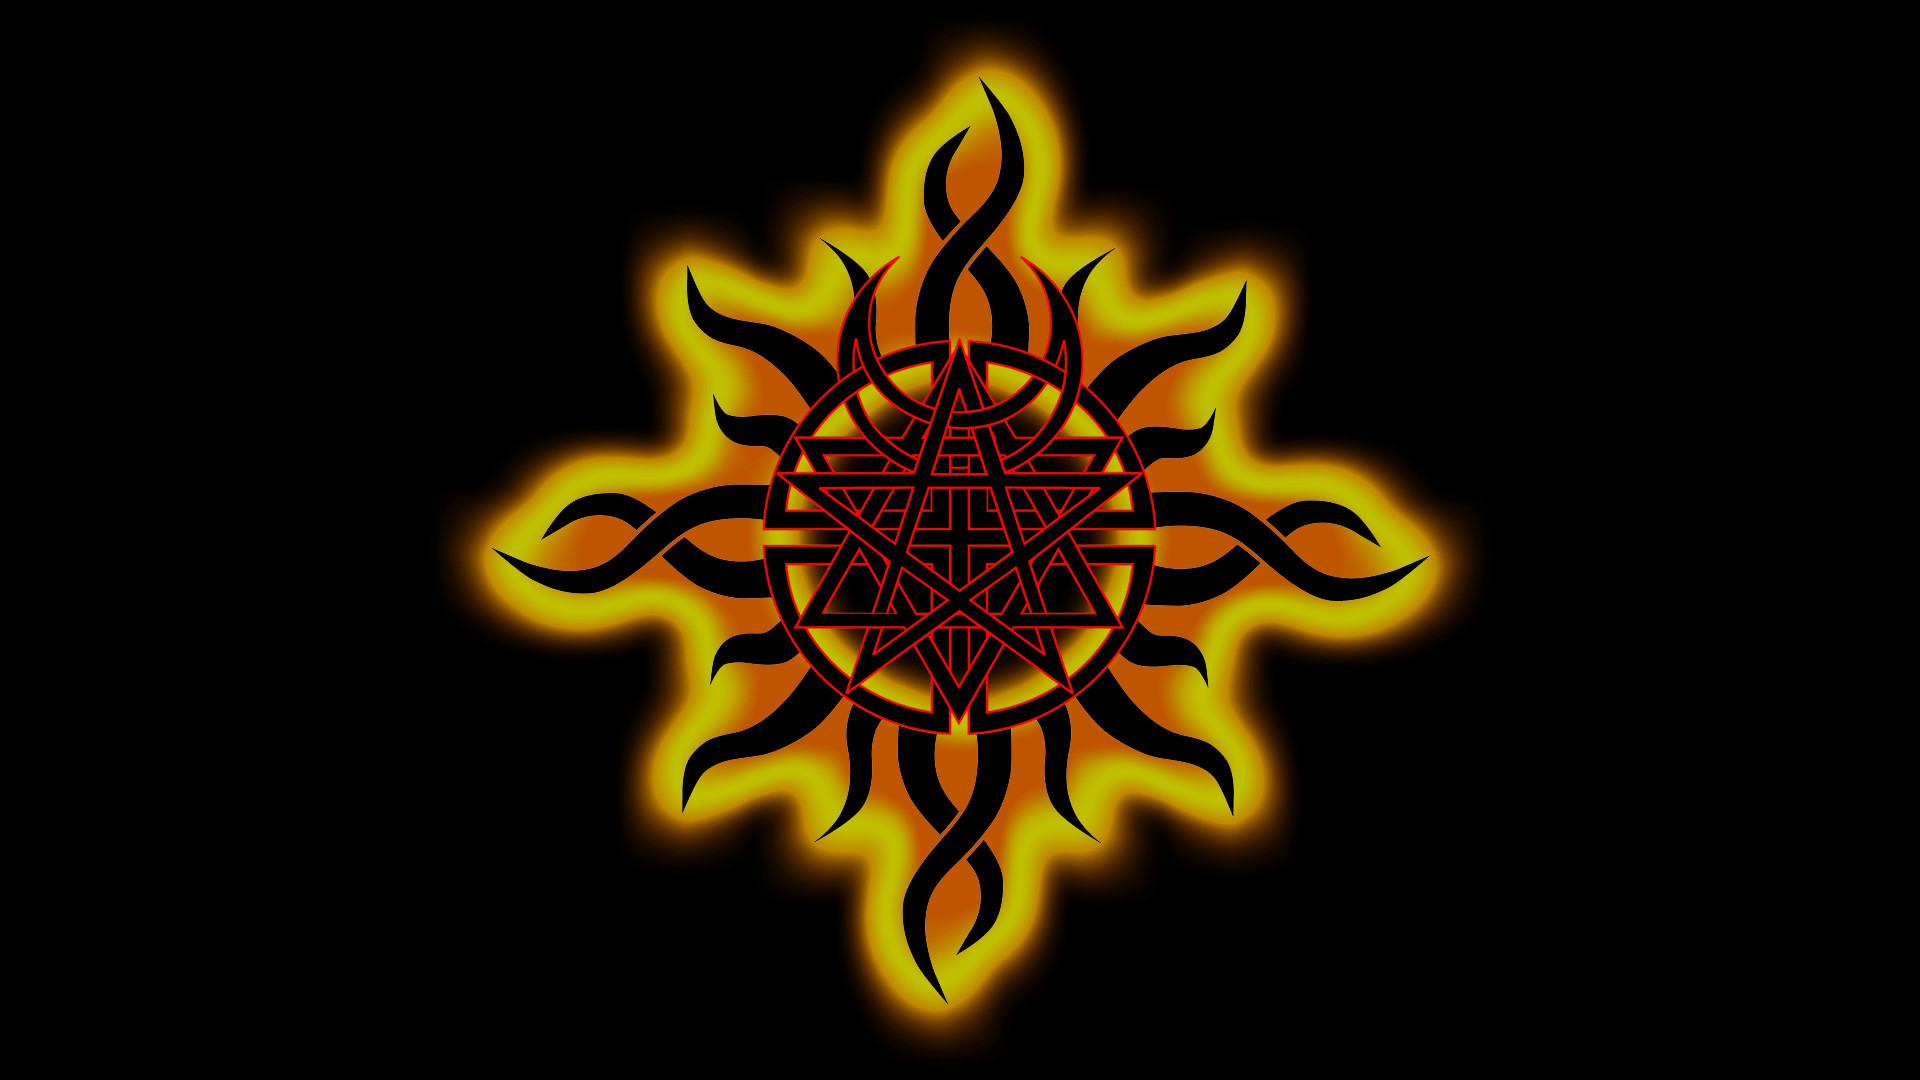 1920x1080 Godsmack Wallpaper Click To View Pictures